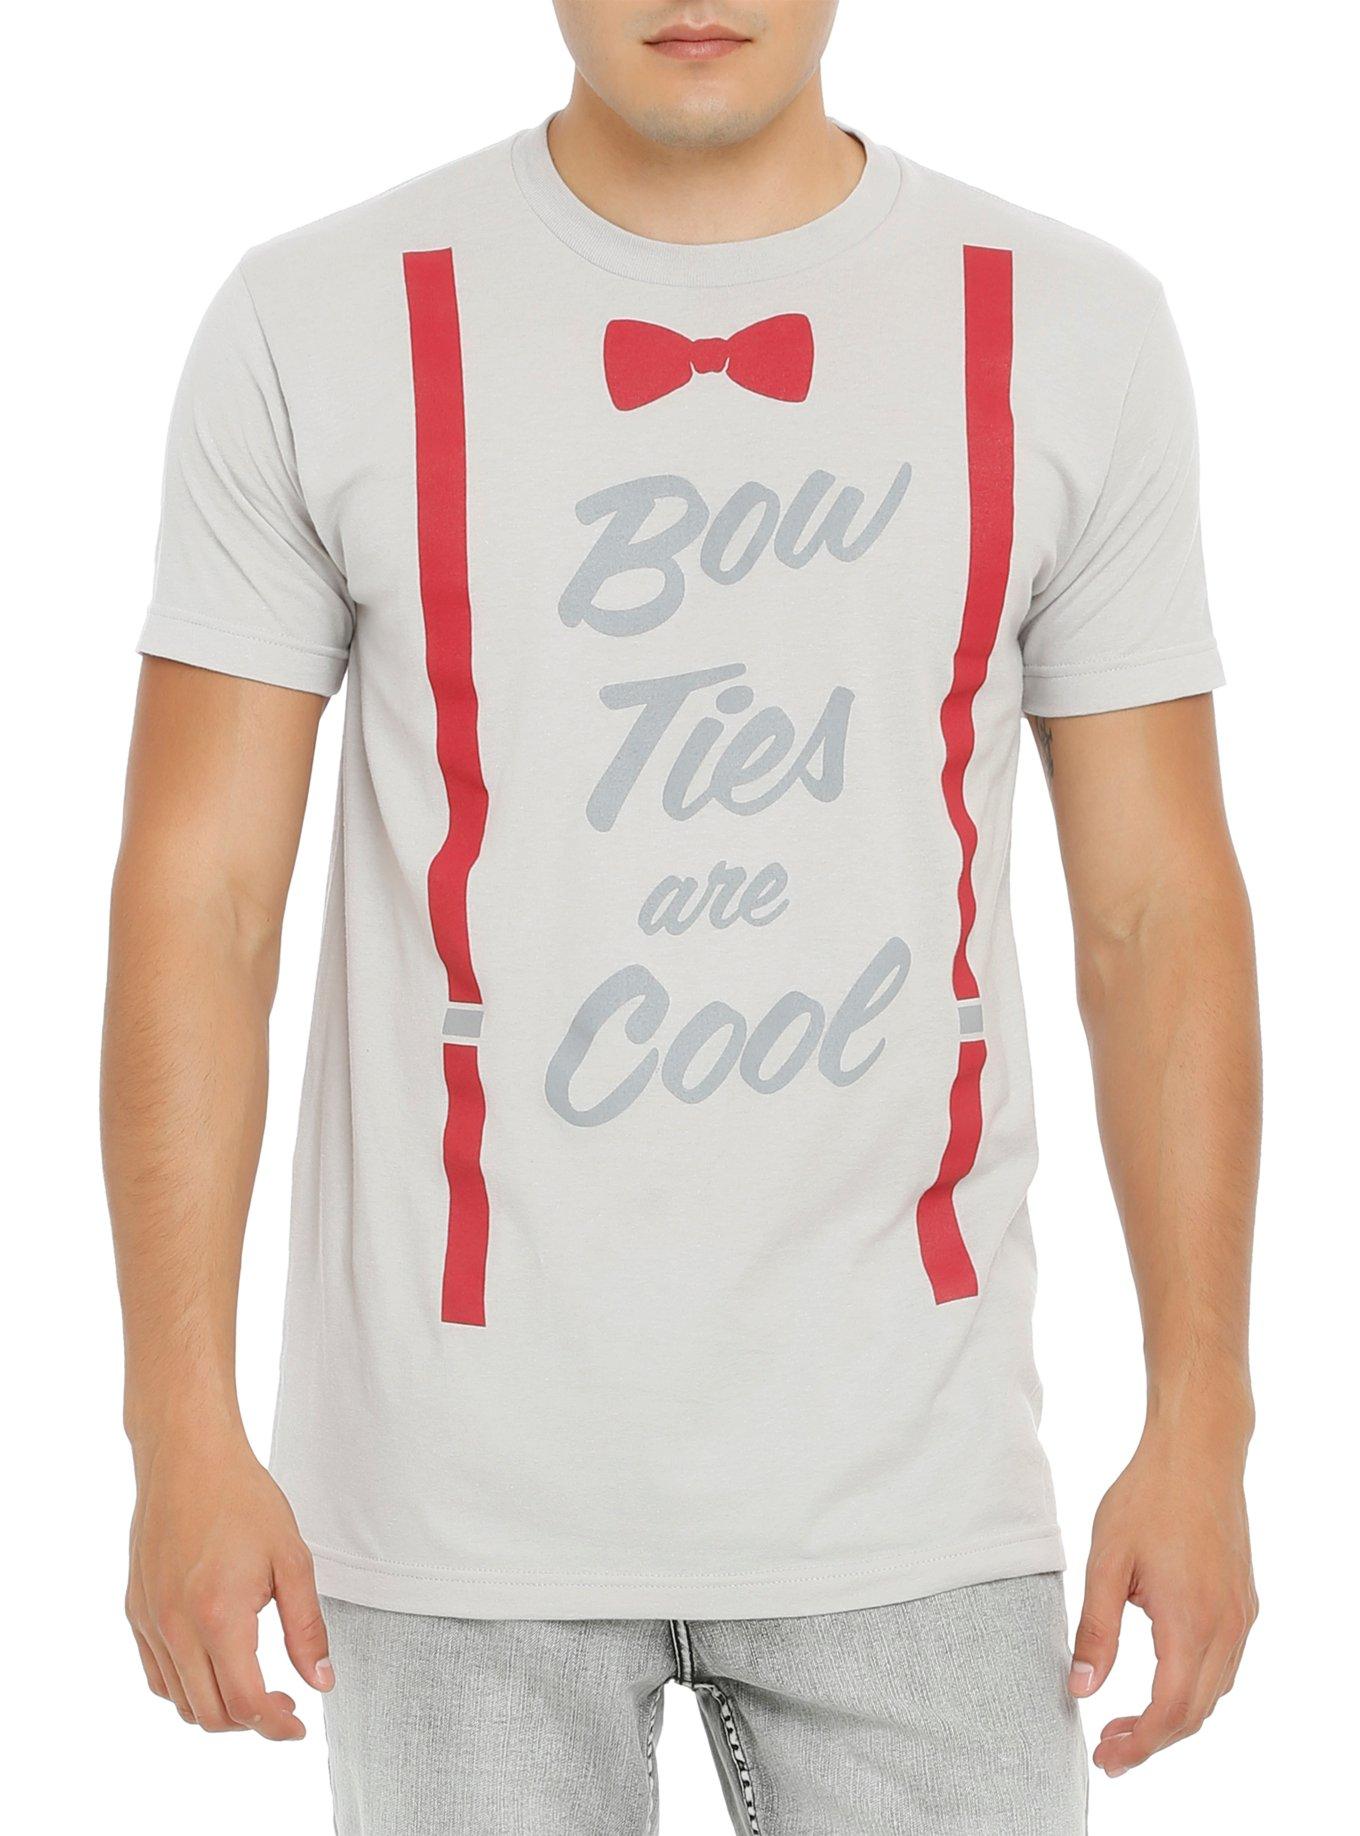 DRWHO BOW TIES ARE COOL TEE, BLACK, hi-res